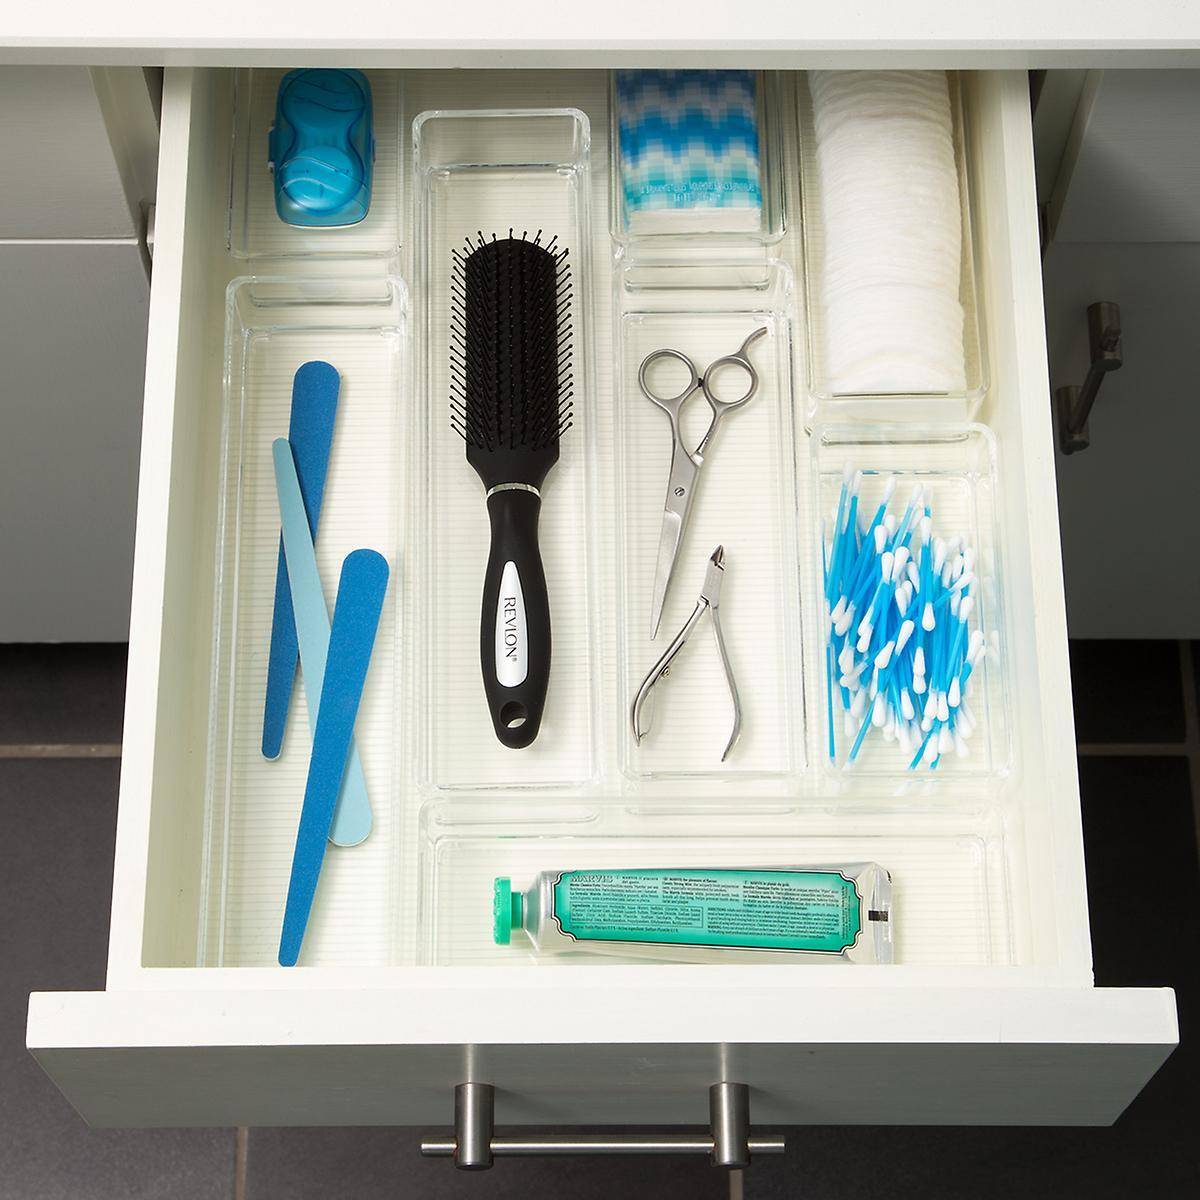 How to Organize a Small Bathroom with these 15 Must-Have Products